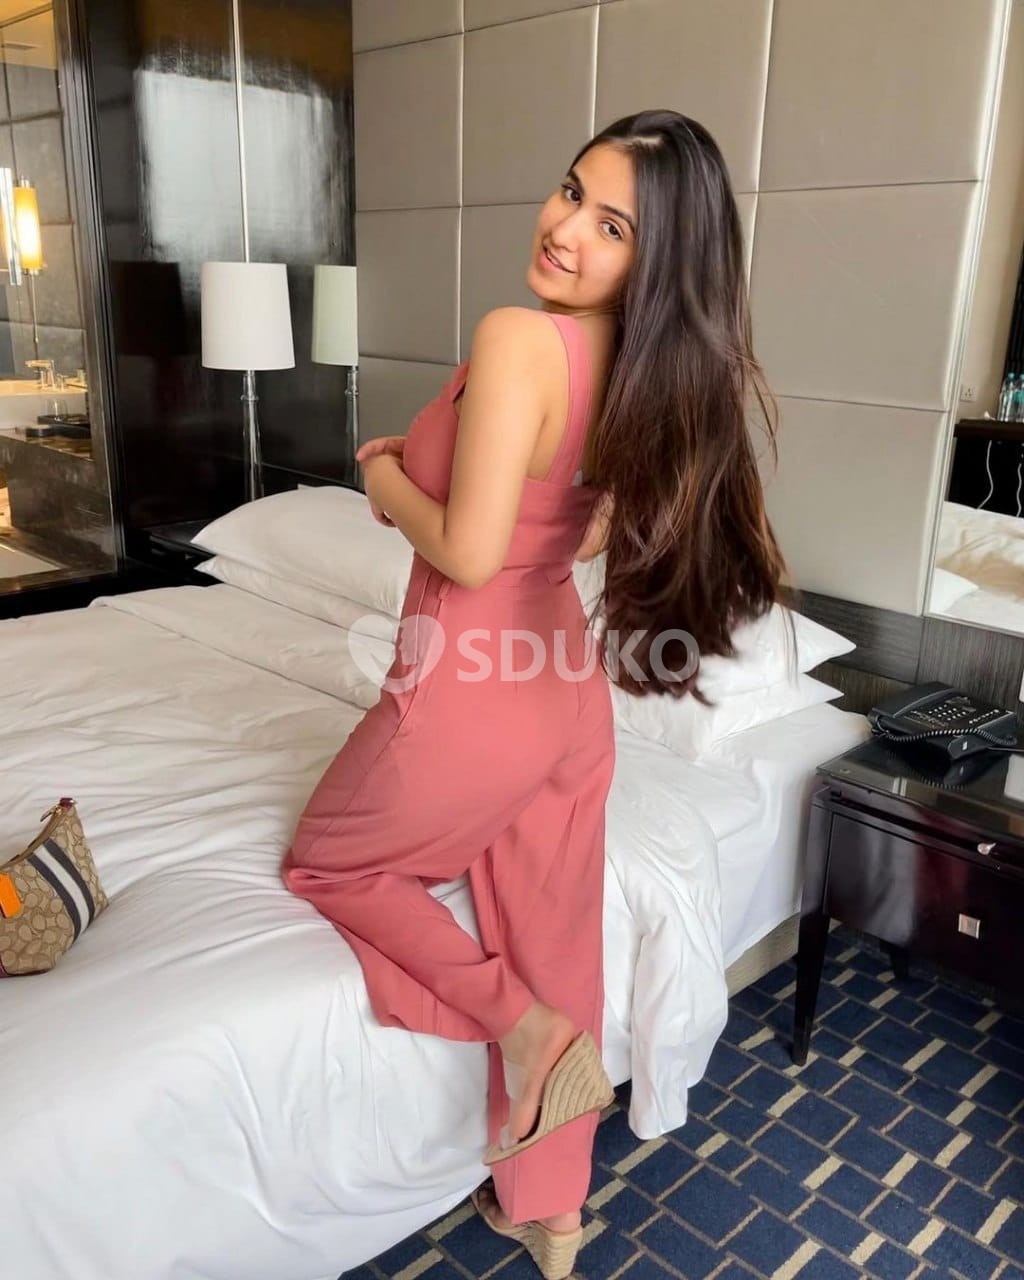 MUSKAN BANDRA JUICY ADULT CLASSIFIED FIND HOT &HORNY STUFF NEAR YOU OUTCALL INCALL AFFORDABLE PRICE WHATSAPP 95710-81977